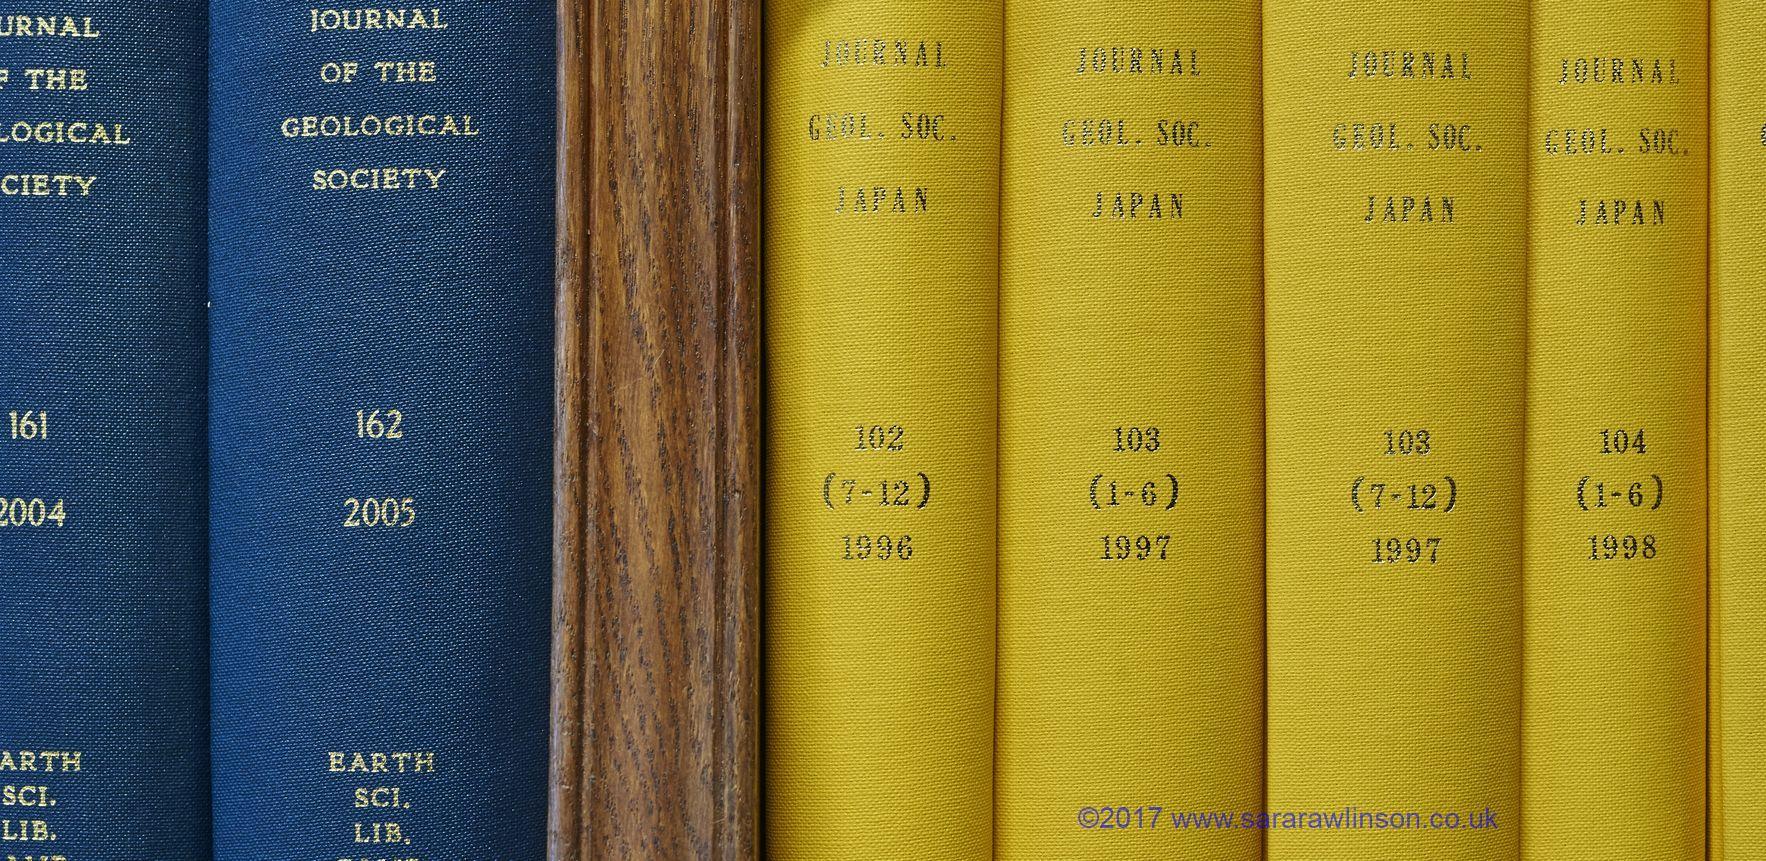 Yellow and blue journal covers on the library shelves; image credit Rawlinson copyright